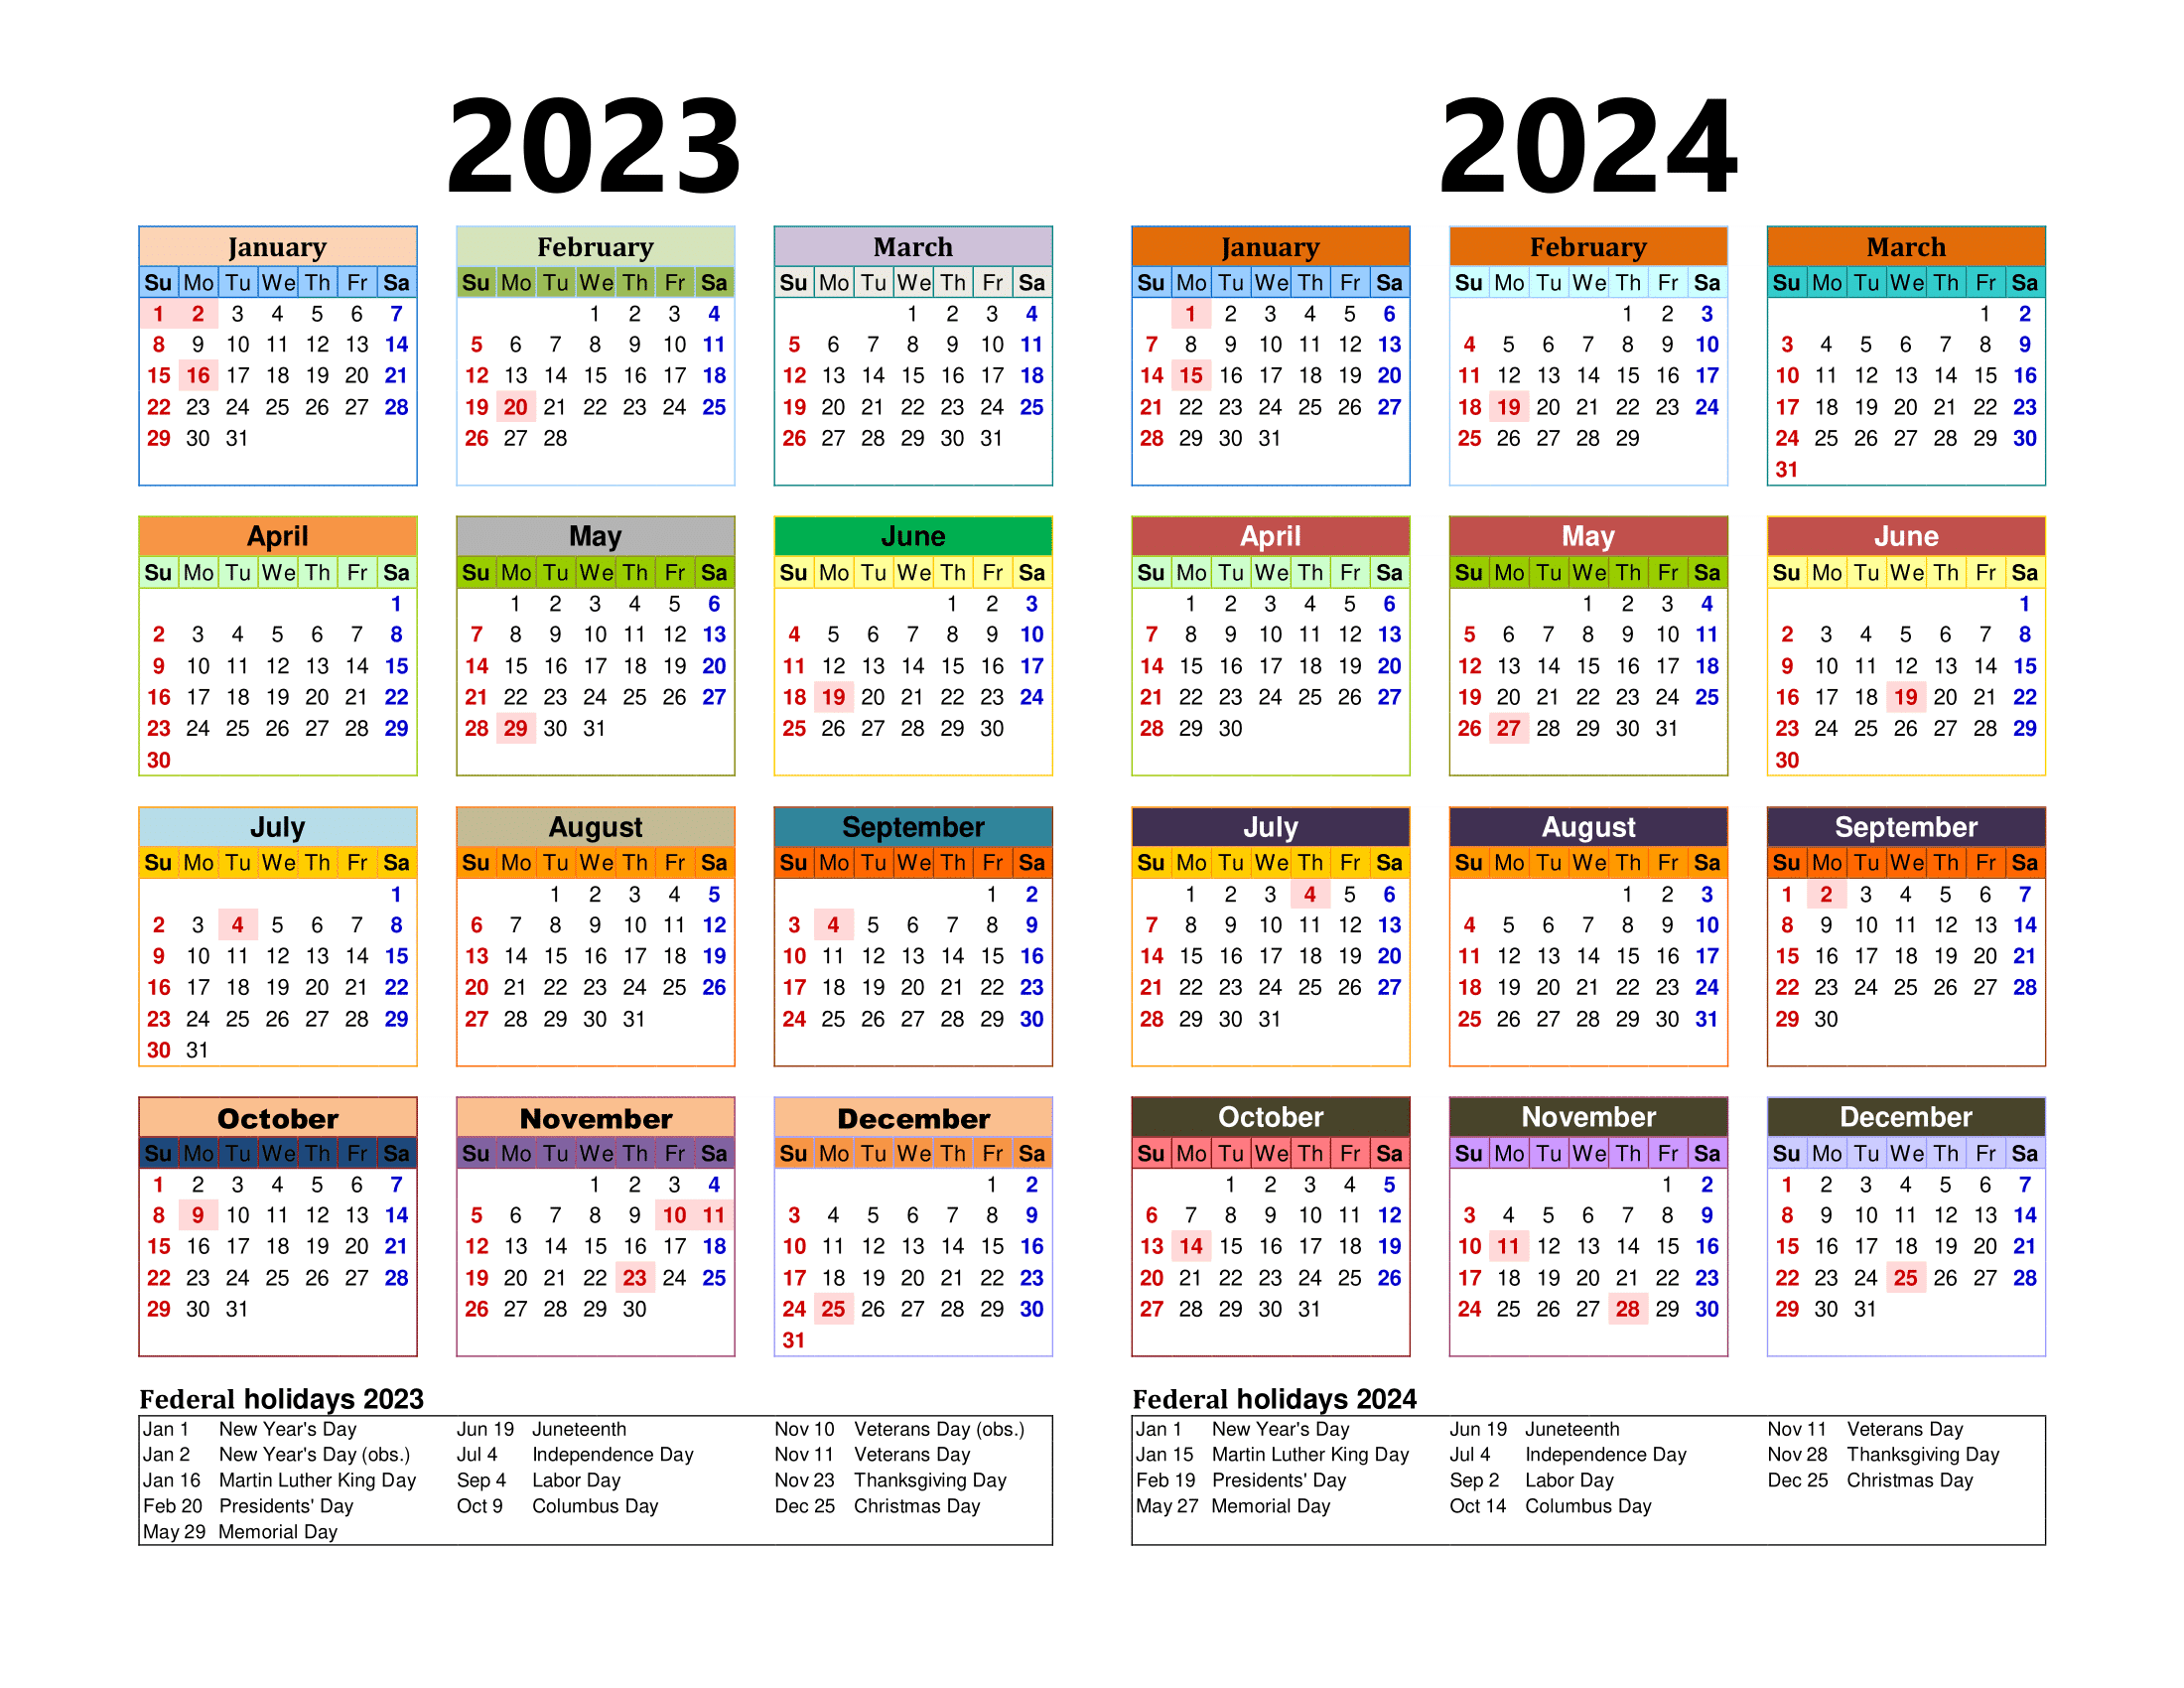 Free Printable Two Year Calendar Templates For 2023 And 2024 In Pdf for Printable Calendar 2023 And 2024